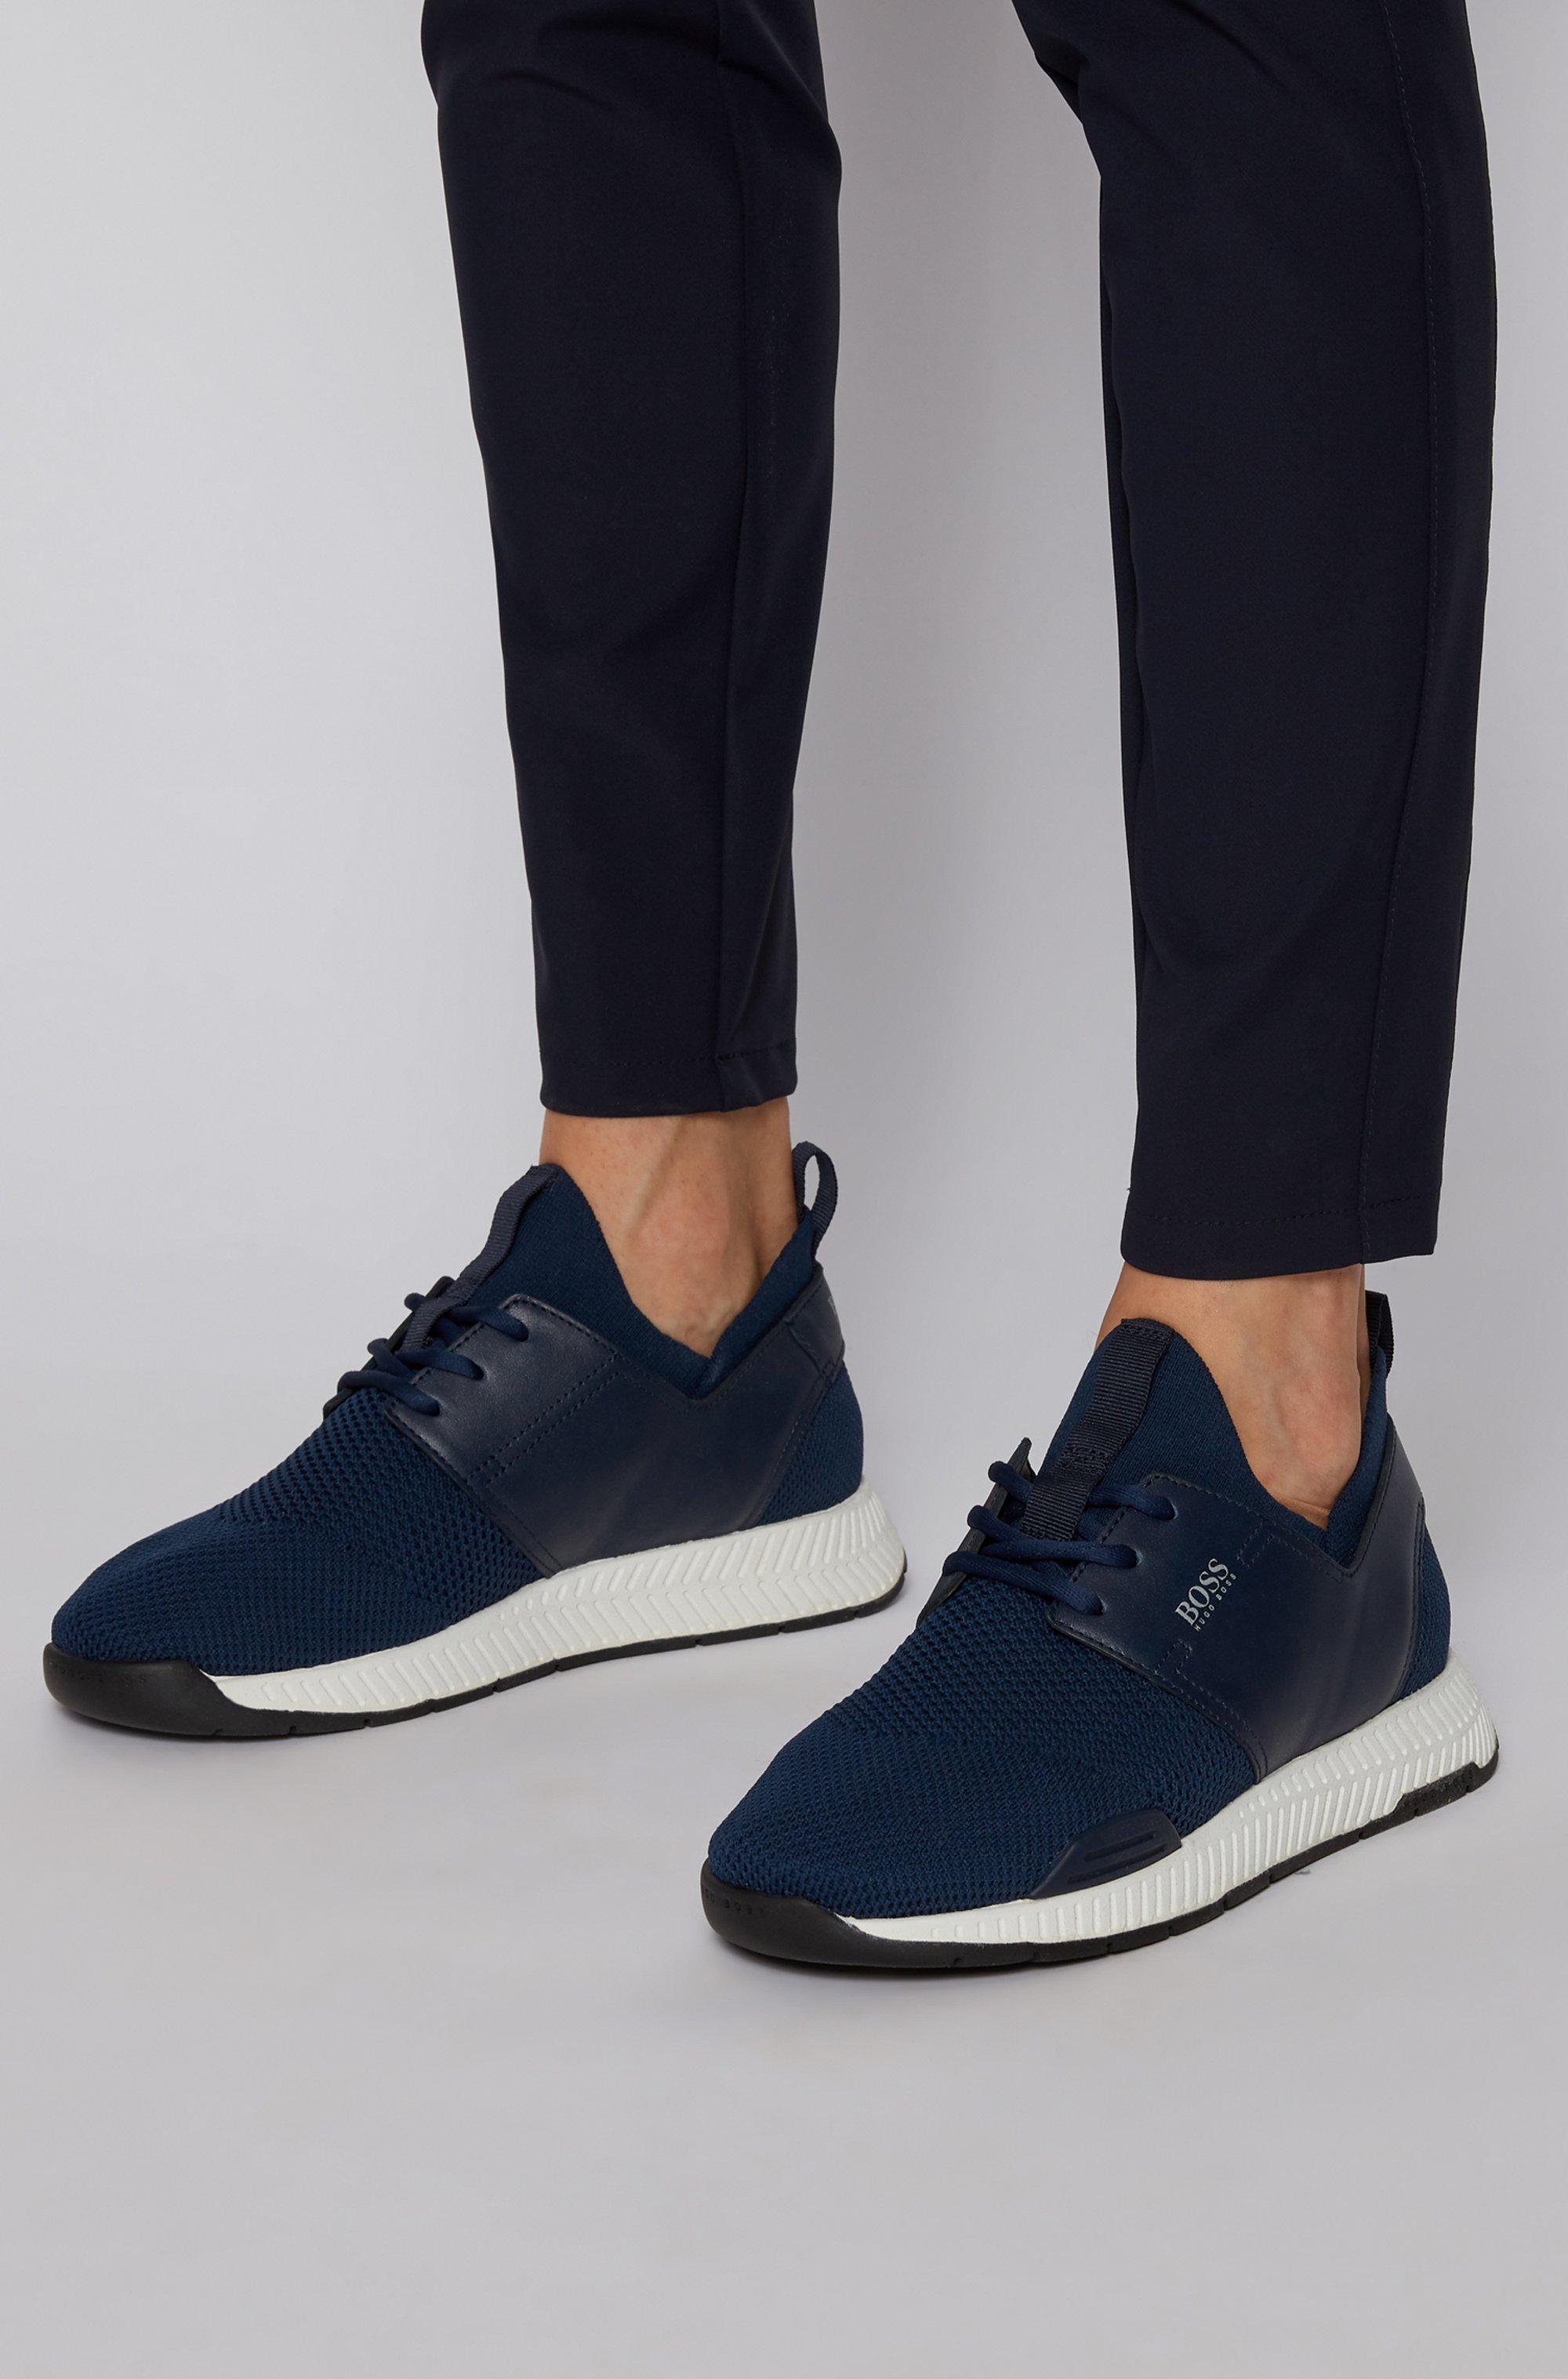 BOSS by HUGO BOSS Unisex Stretch-knit Trainers With Leather Panels- Dark  Blue Women's Sneakers Size 8 | Lyst